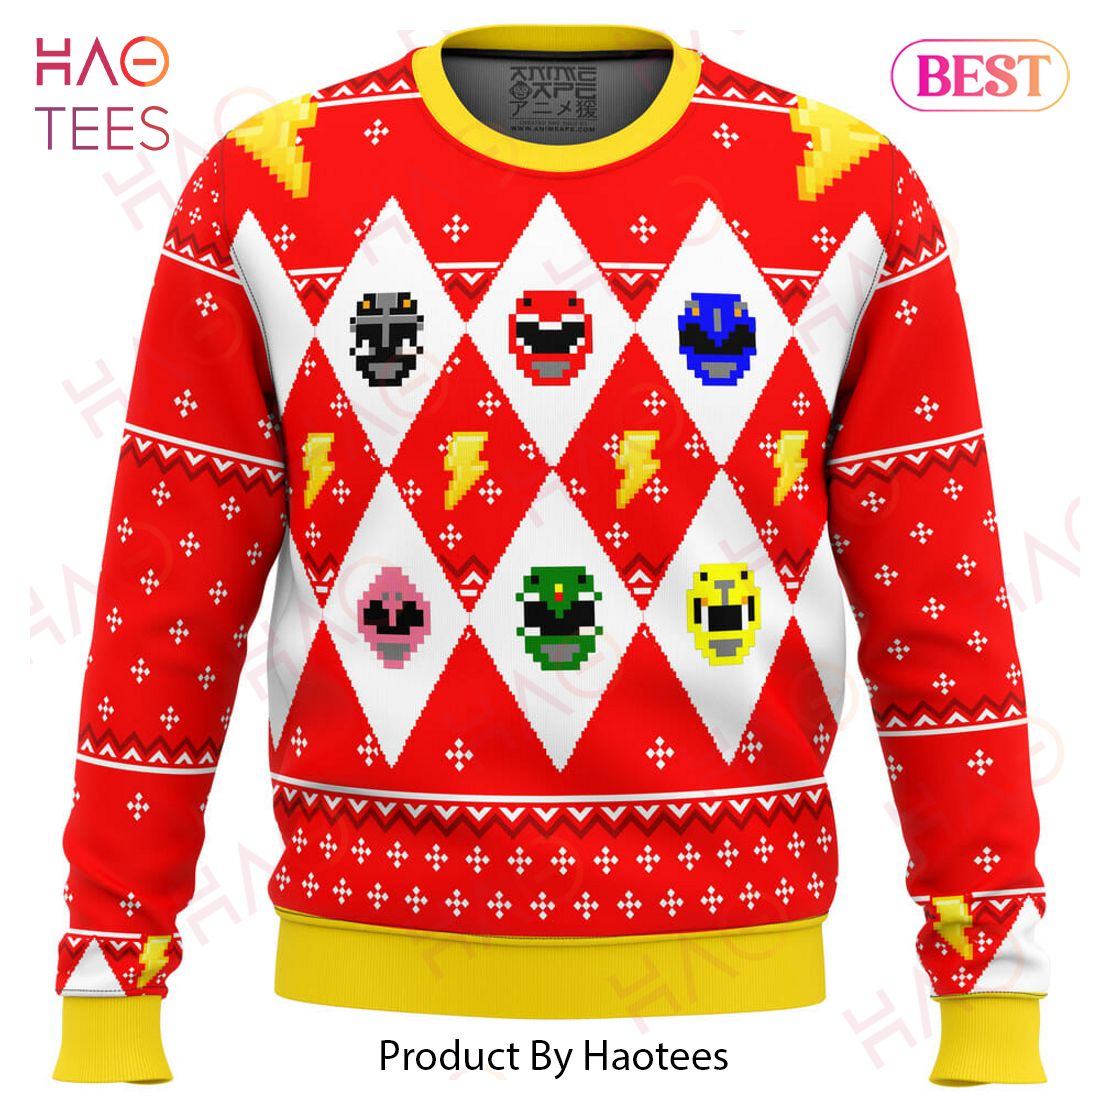 Mighty Morphin Power Rangers Ugly Christmas Sweater